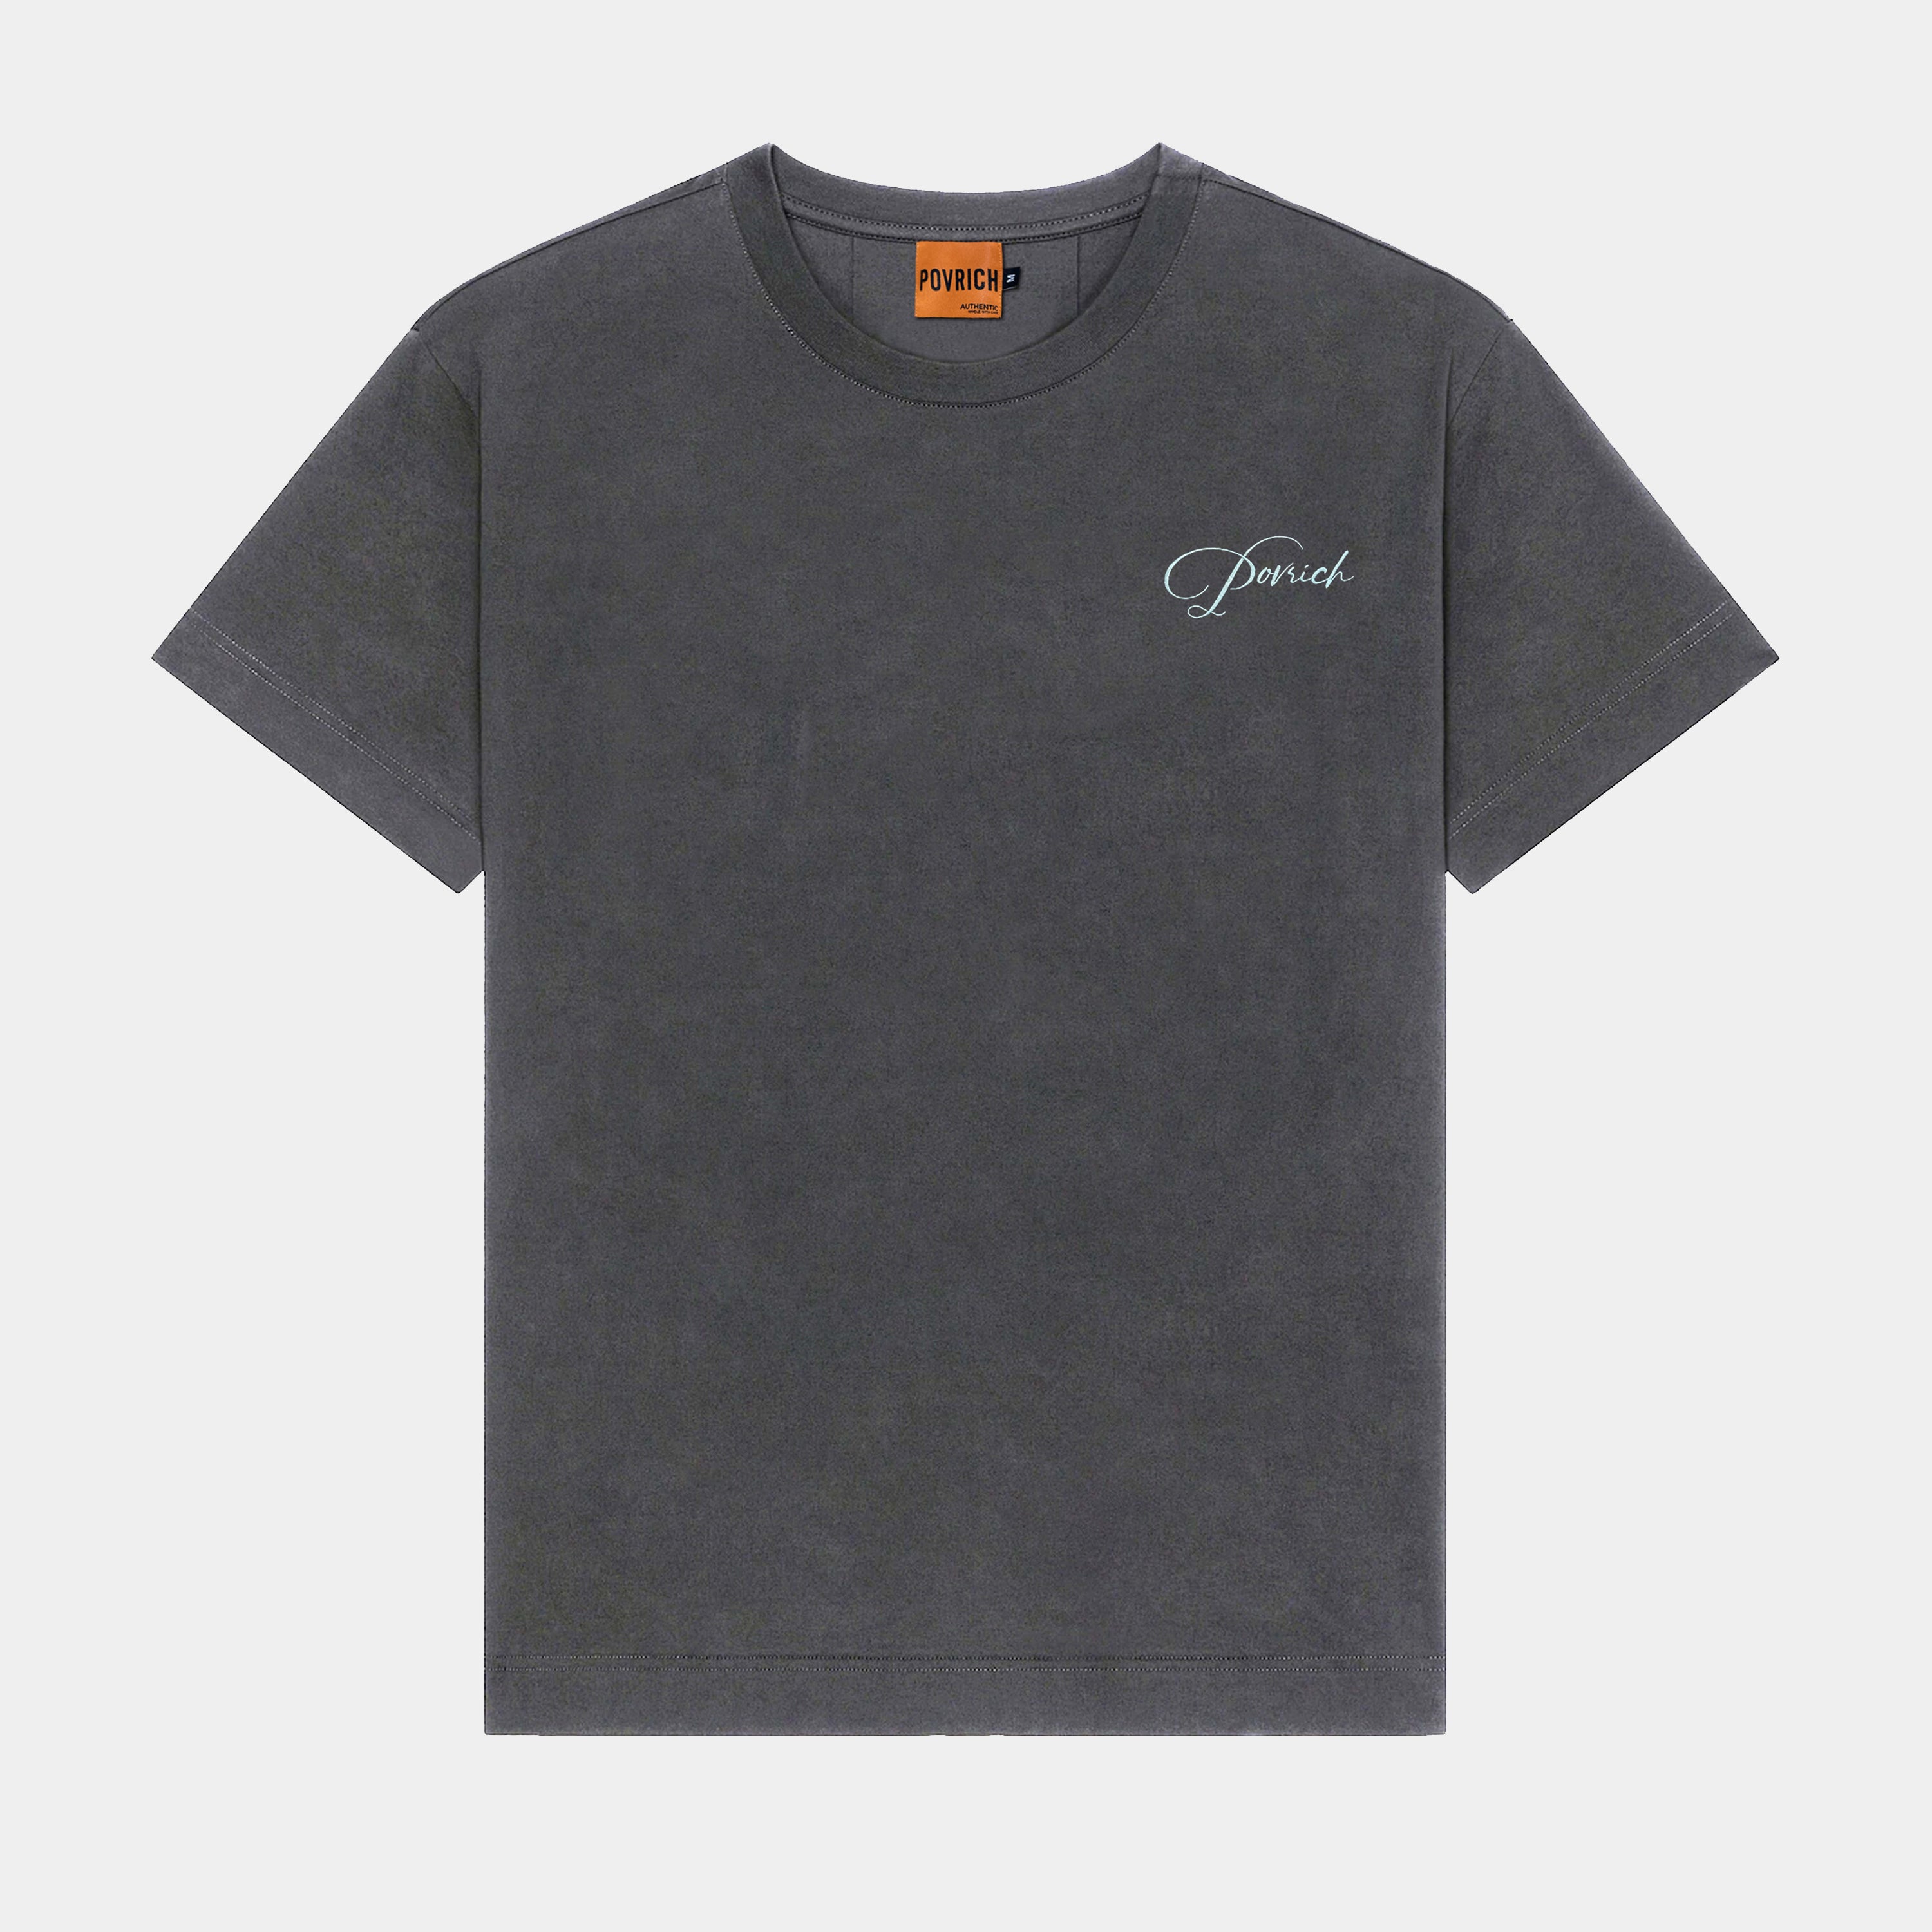 Washed Grey Embroidered Signature Tee with Povrich Logo. A classic and versatile streetwear piece. Made with high-quality cotton for comfort and durability.